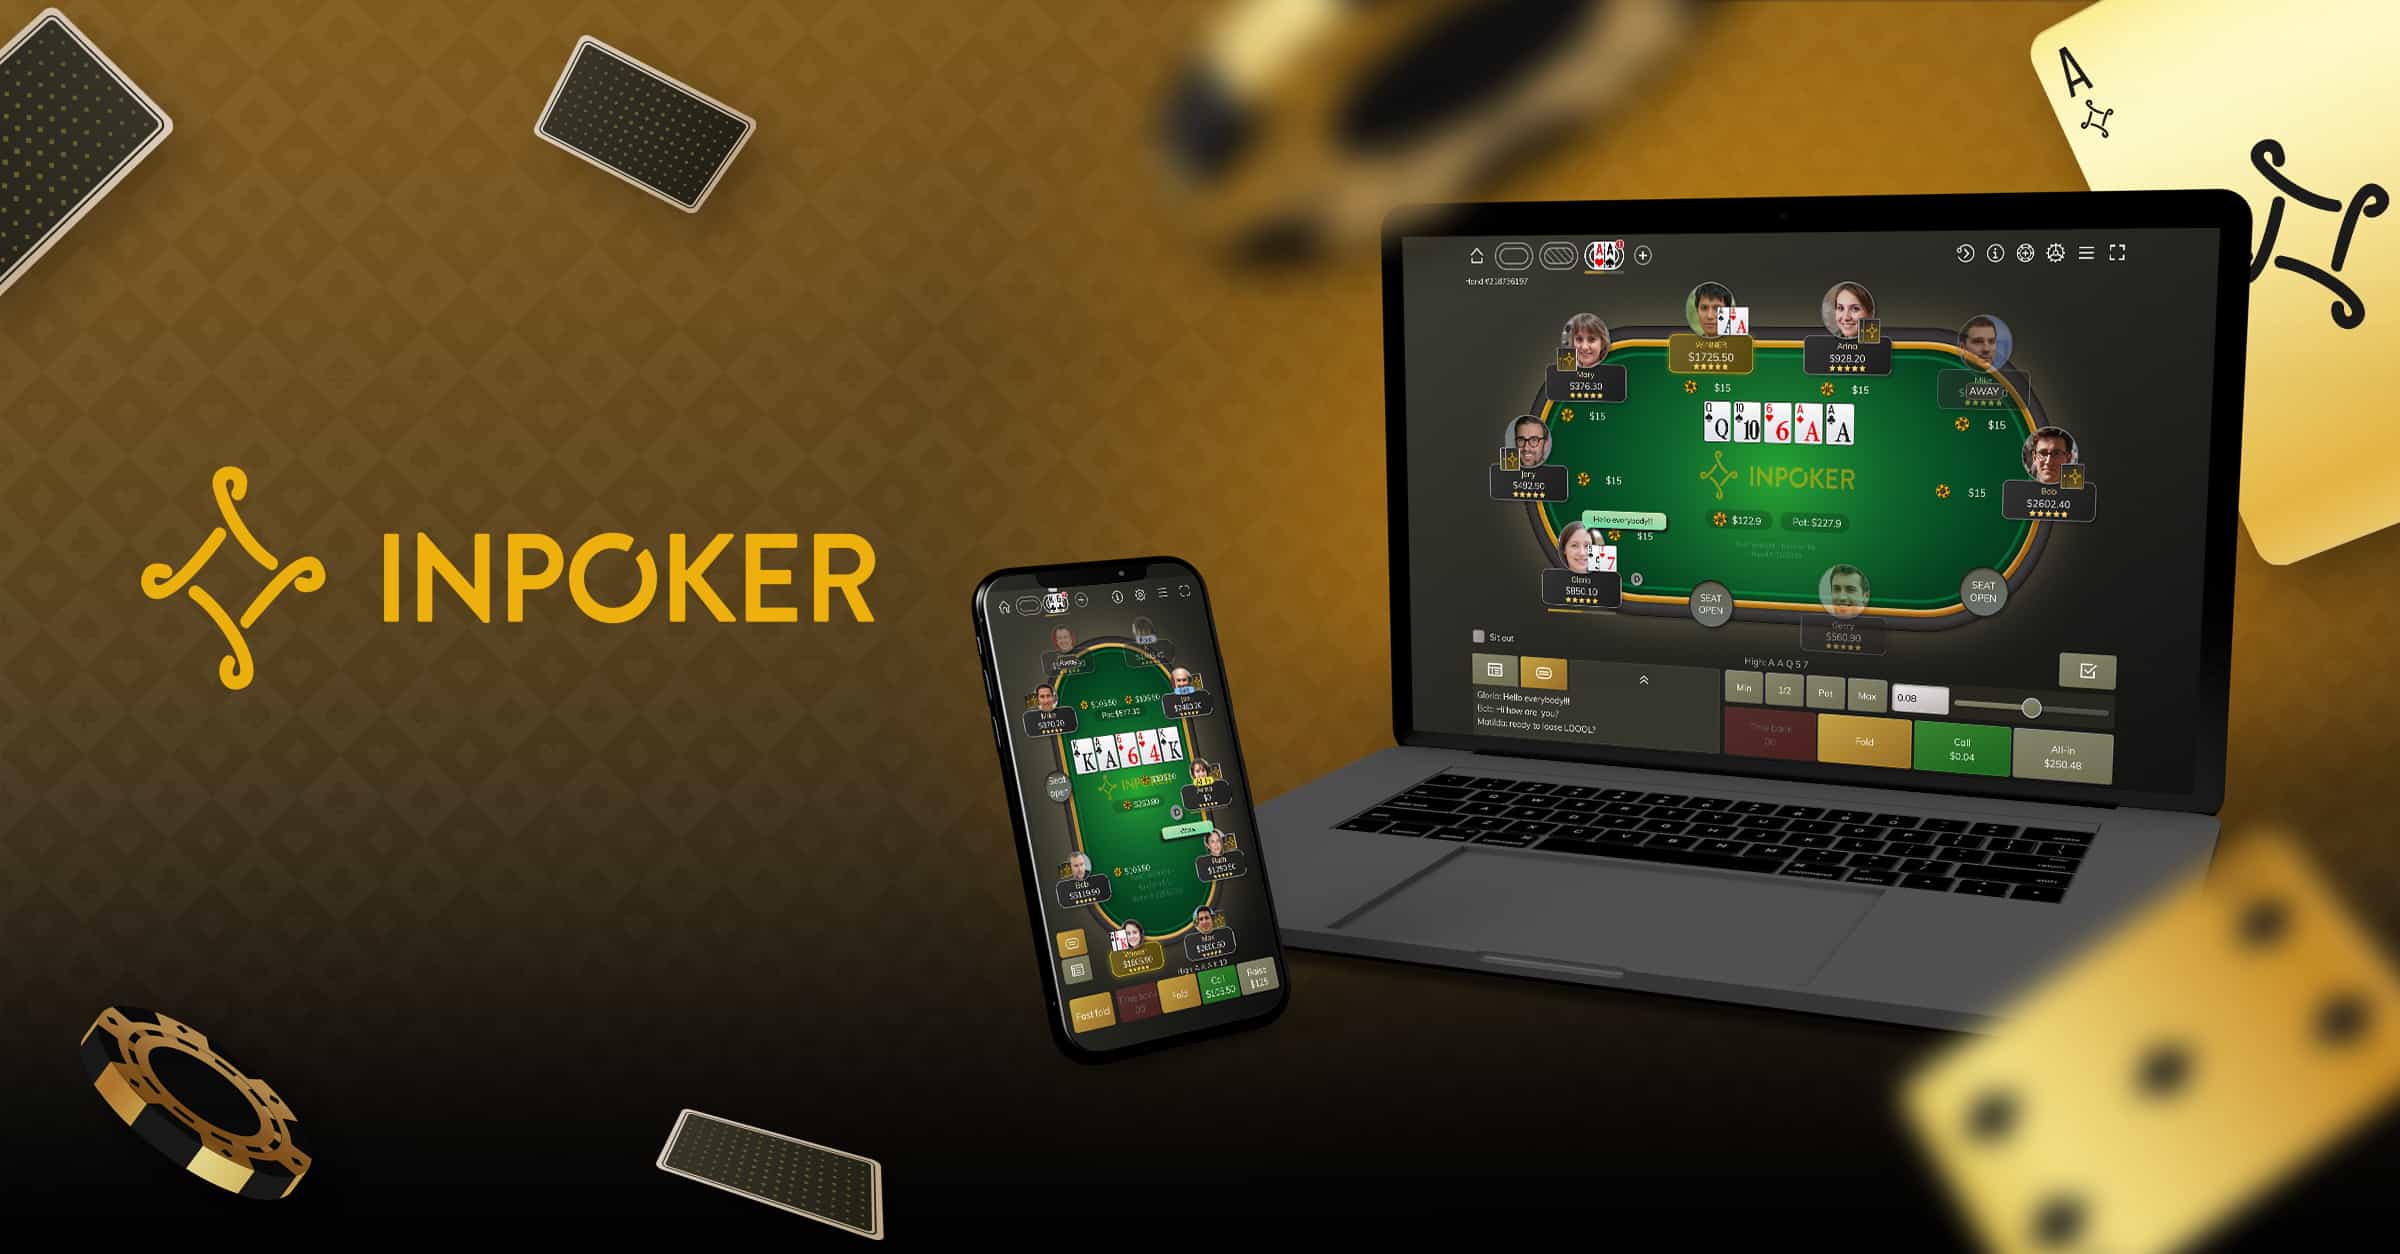 Inpoker-launches-an-e-sports-platform-that-aims-to-modernize-the-online-poker-experience